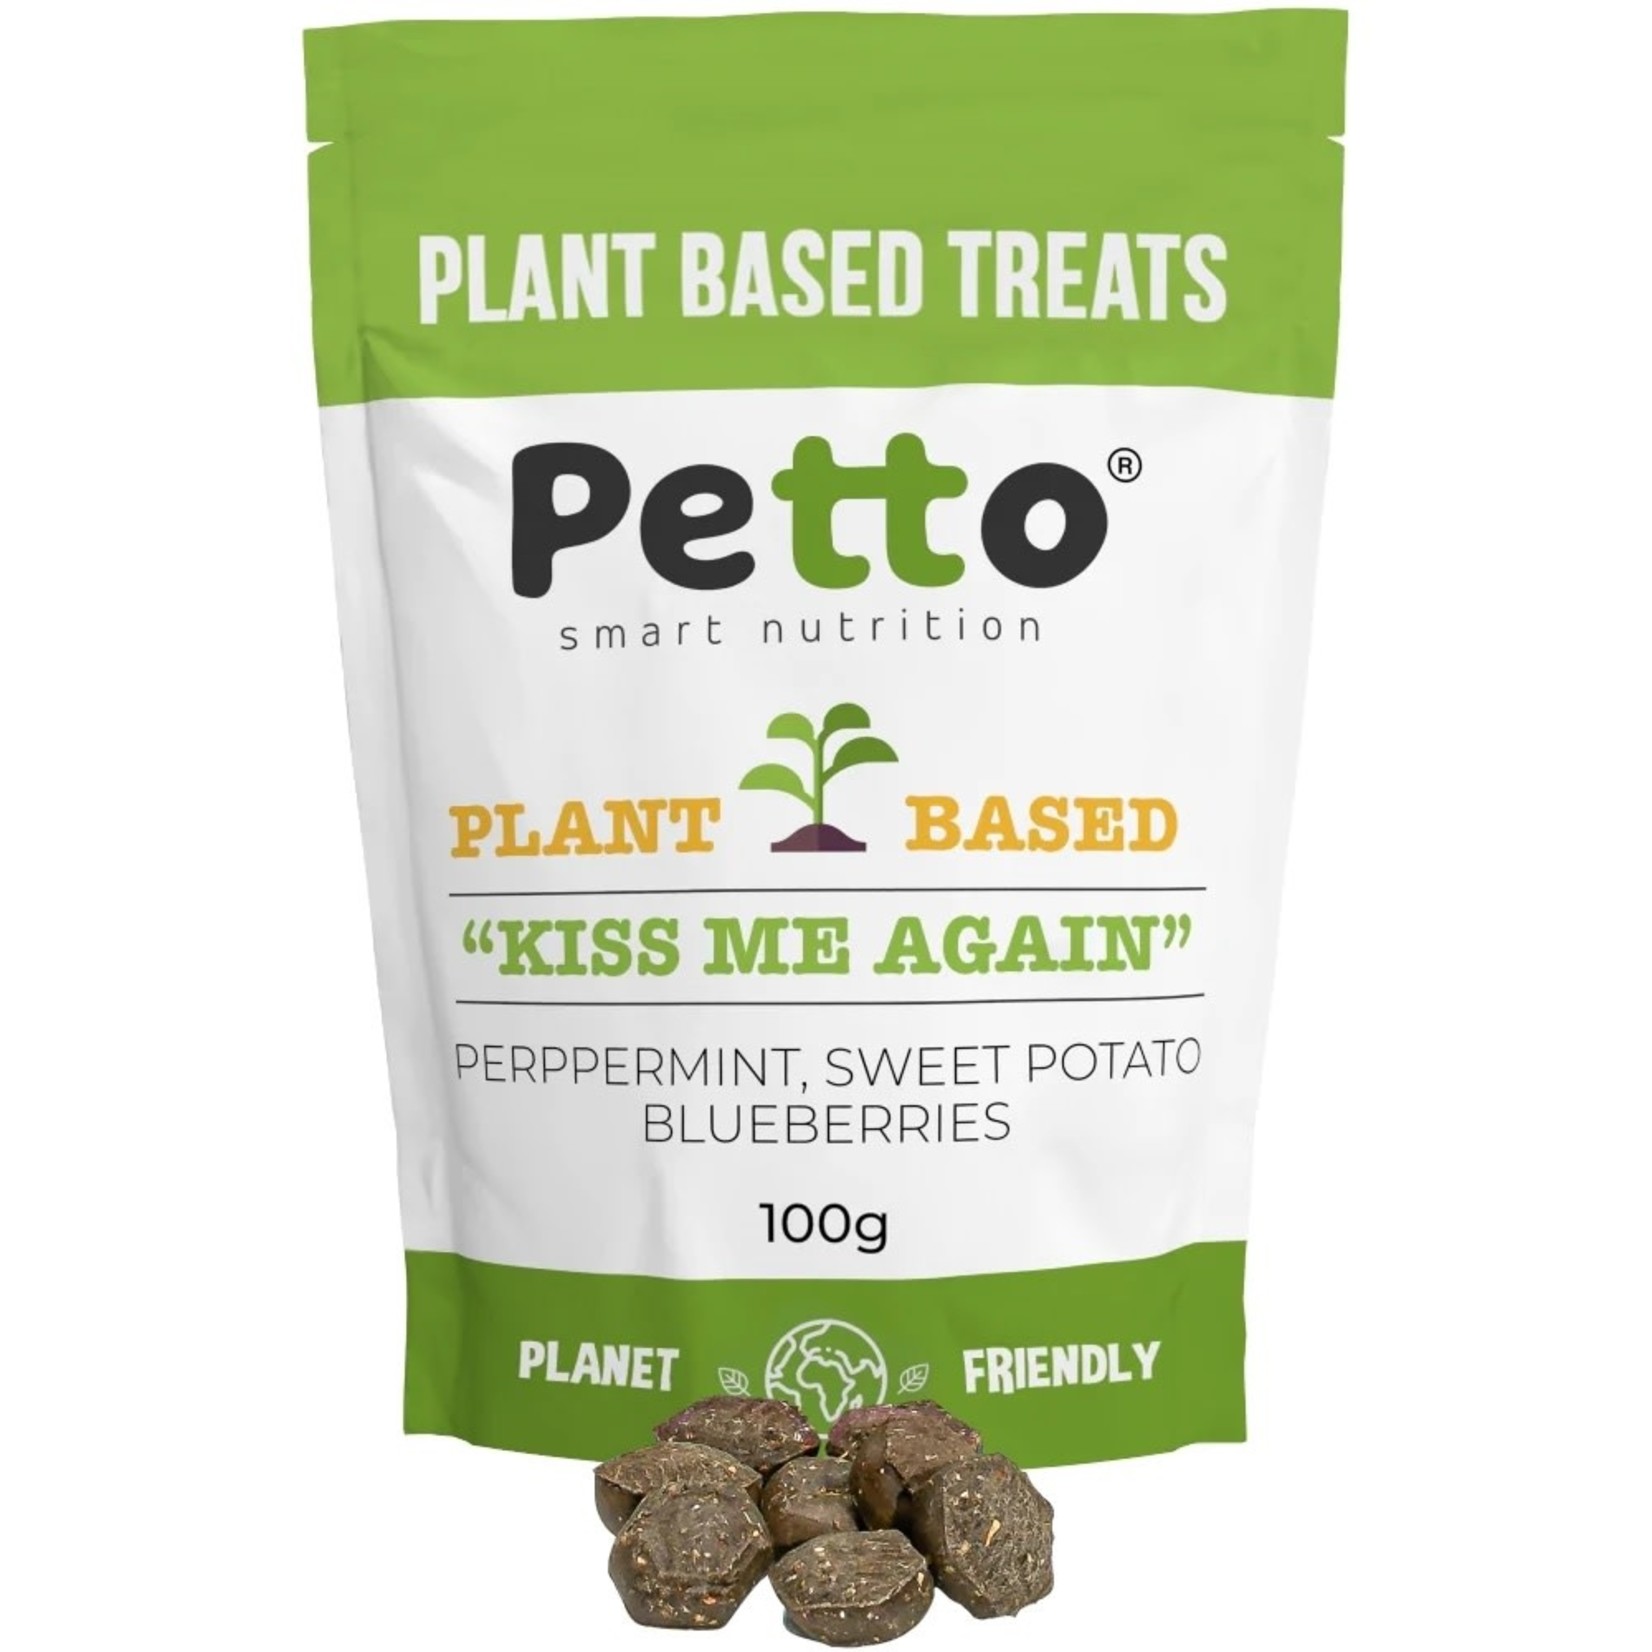 Petto "Kiss Me Again" Plant Based Dog Treats with Peppermint, Sweet Potato and Blueberries, 100g